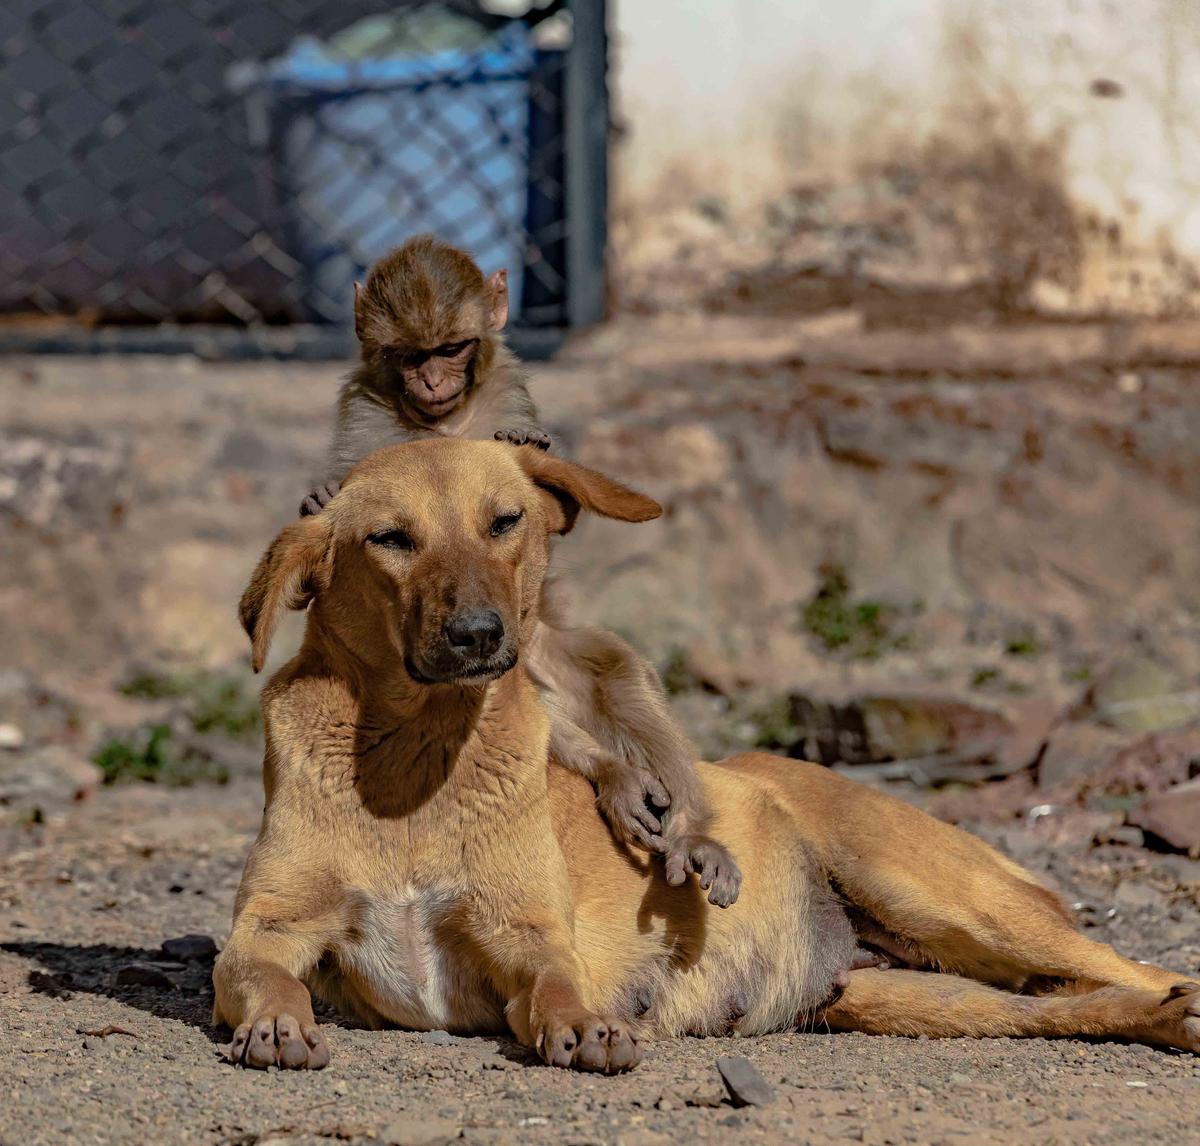 Orphaned monkey grooms a pregnant dog in Chakki Mod, Solan, in Himachal Pradesh, northern India. (Caters News)